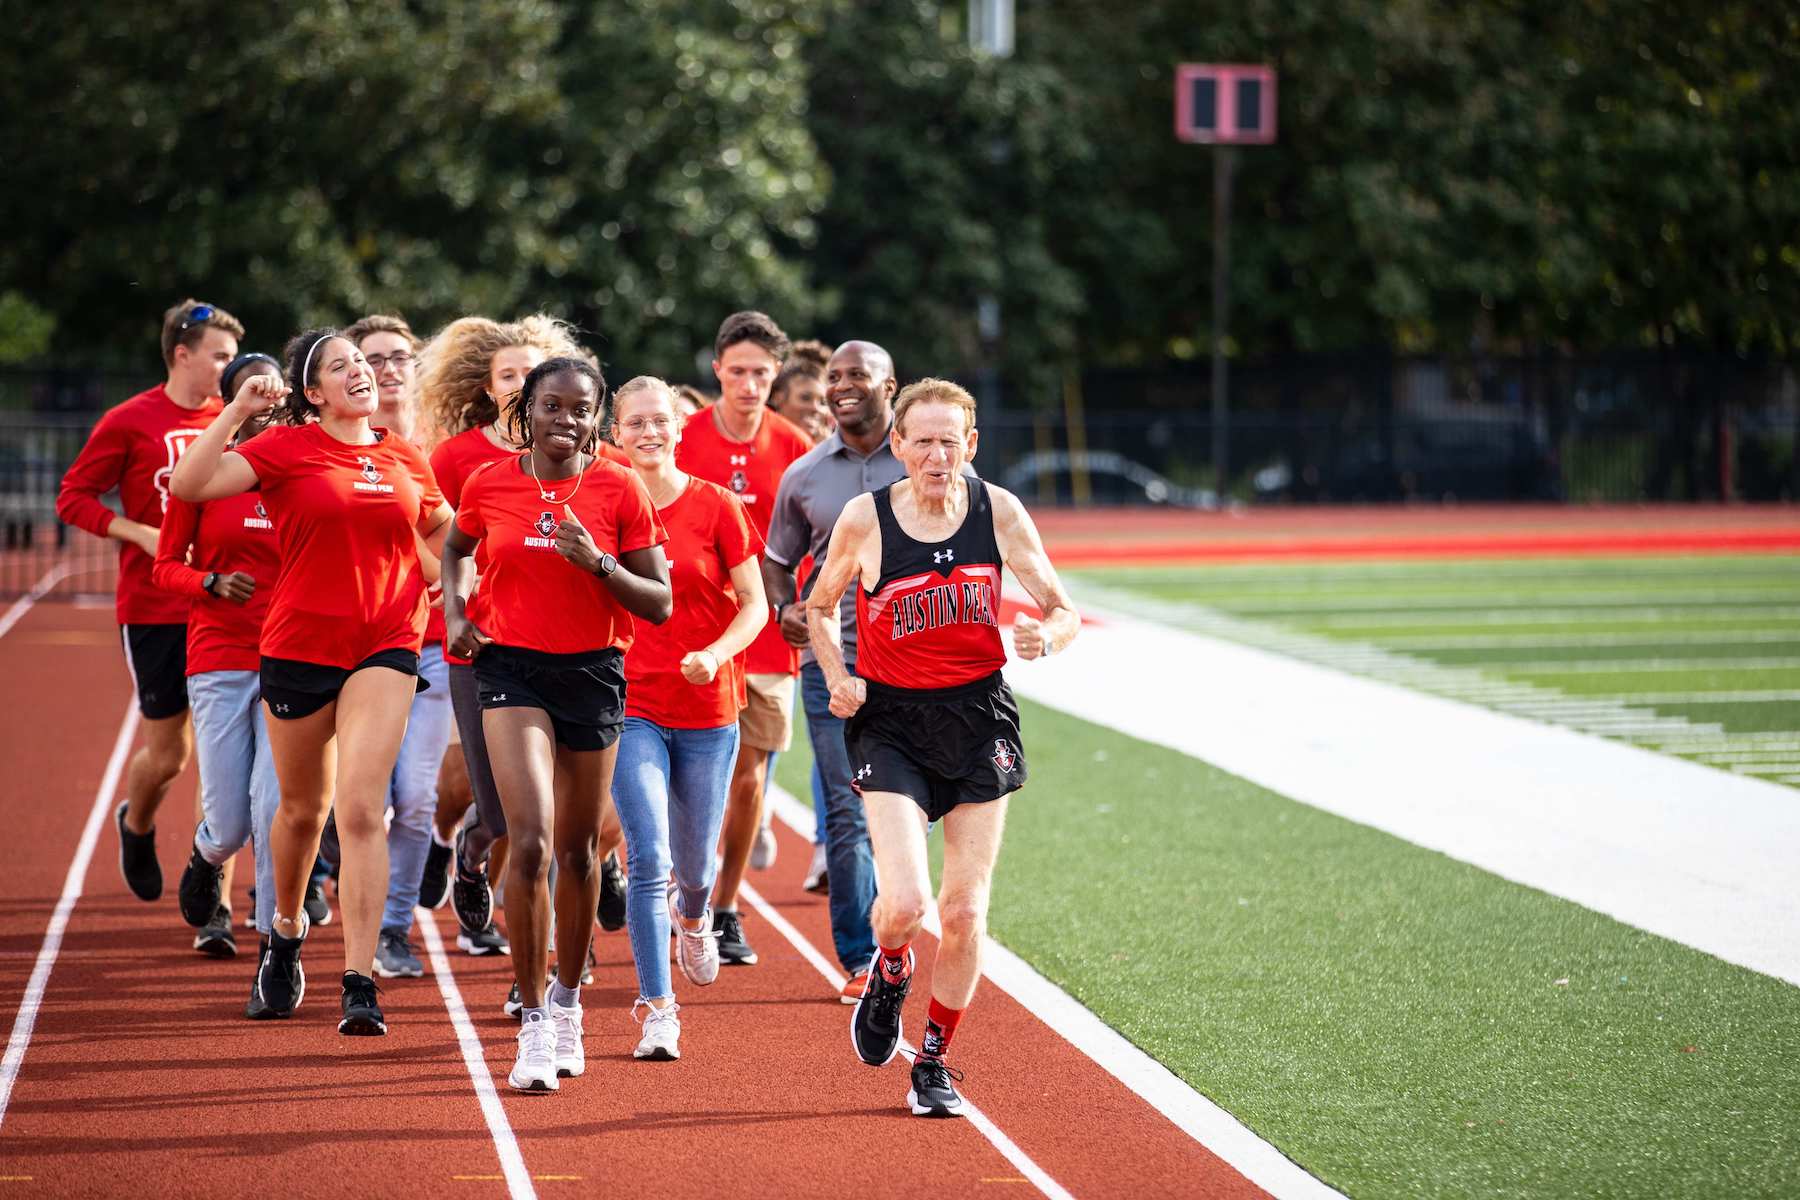 Cheered on by the APSU Track team, Ron Morton (’70), far right, breezes through a lap on the newly named Ron and Andrea Morton Track in Fortera Stadium to commemorate the new track’s ribbon-cutting ceremony on Friday, Sept. 9. Since he had been used to running on a subpar surface during his time on the track team in the ‘60s, Morton wanted to celebrate the state-of-the-art track by experiencing it himself.  Sean McCully | University Photography and Videography Coordinator 